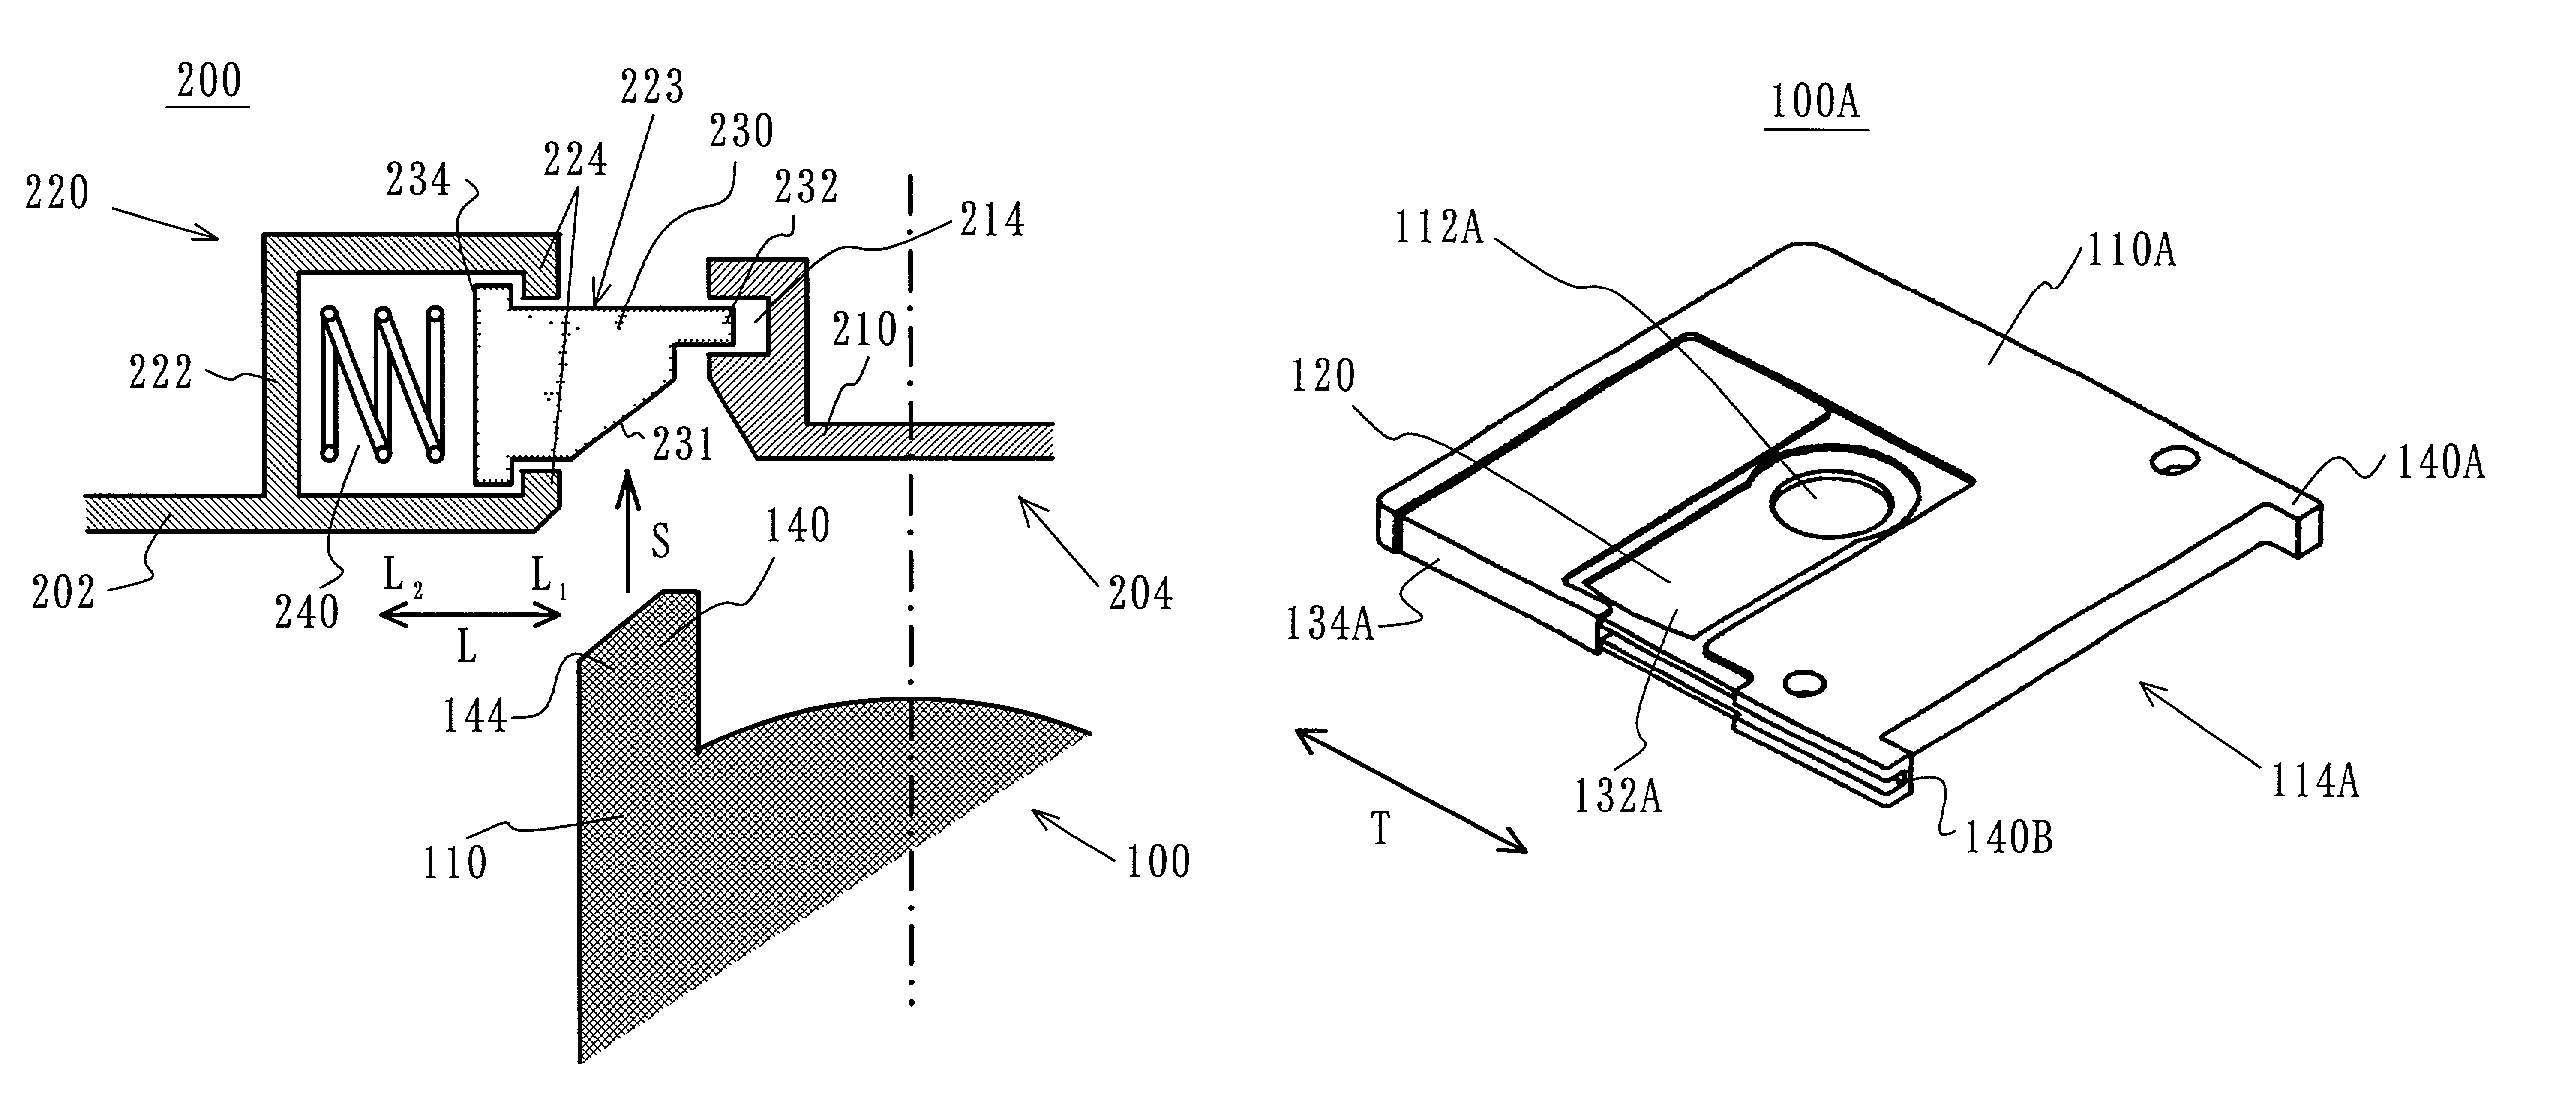 Cartridge and drive unit for preventing erroneous insertions of the cartridge